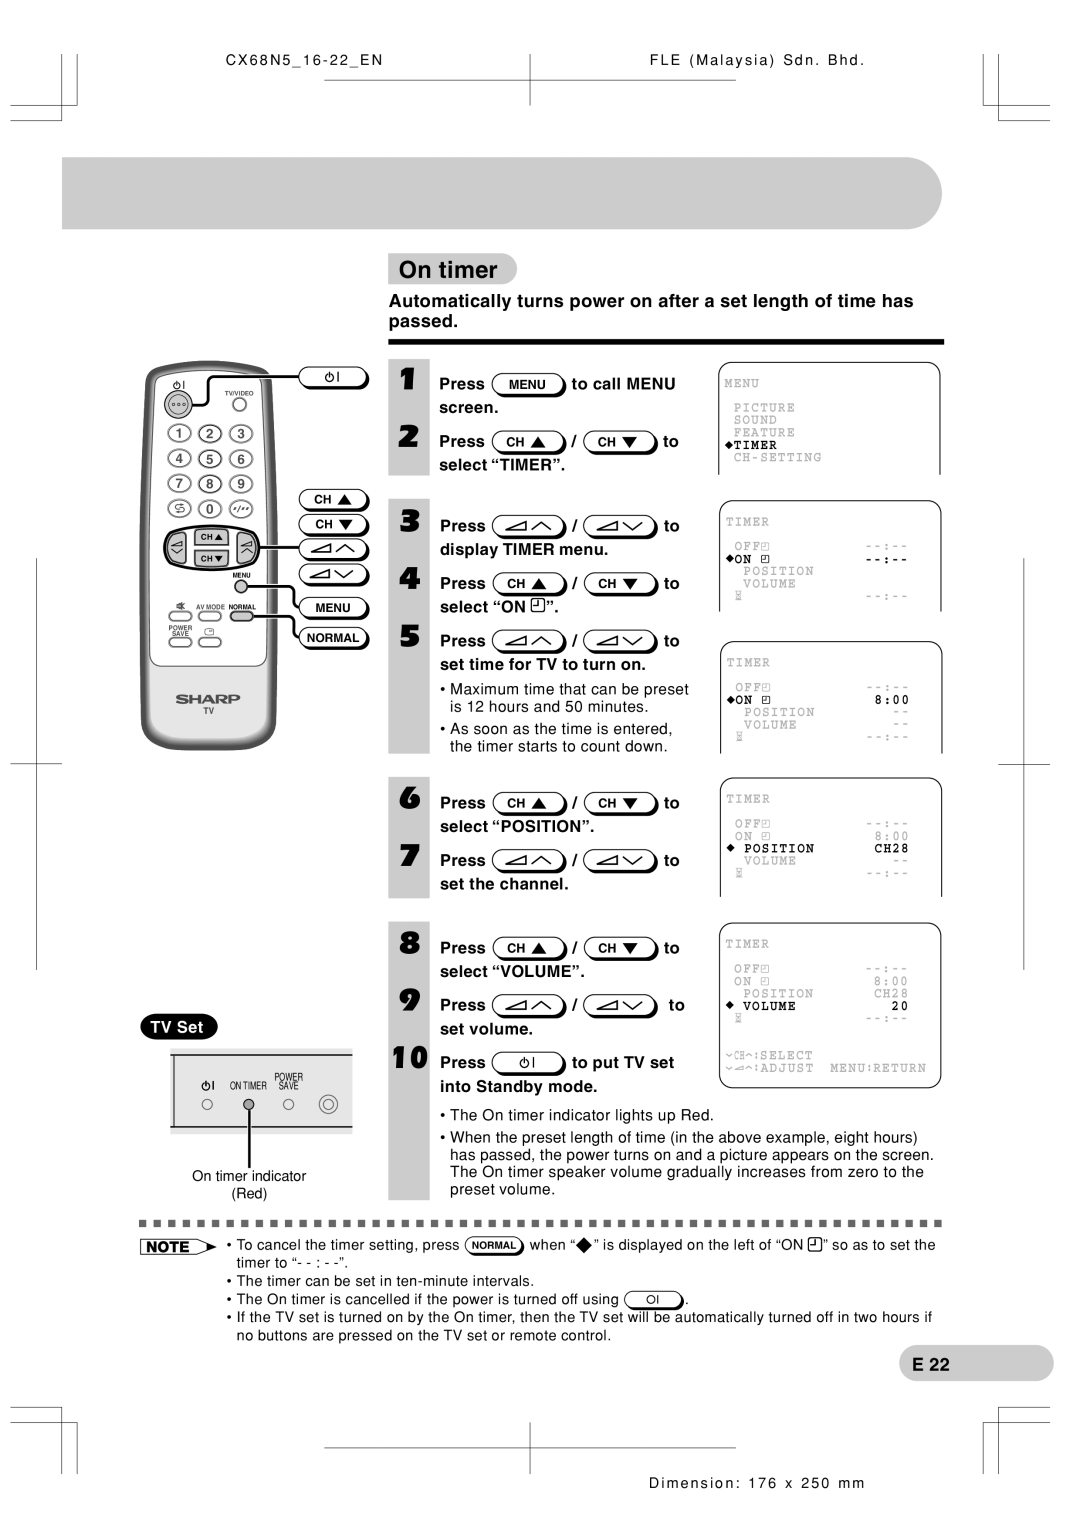 Sharp Cx68n5 operation manual On timer, Automatically turns power on after a set length of time has passed, TV Set 